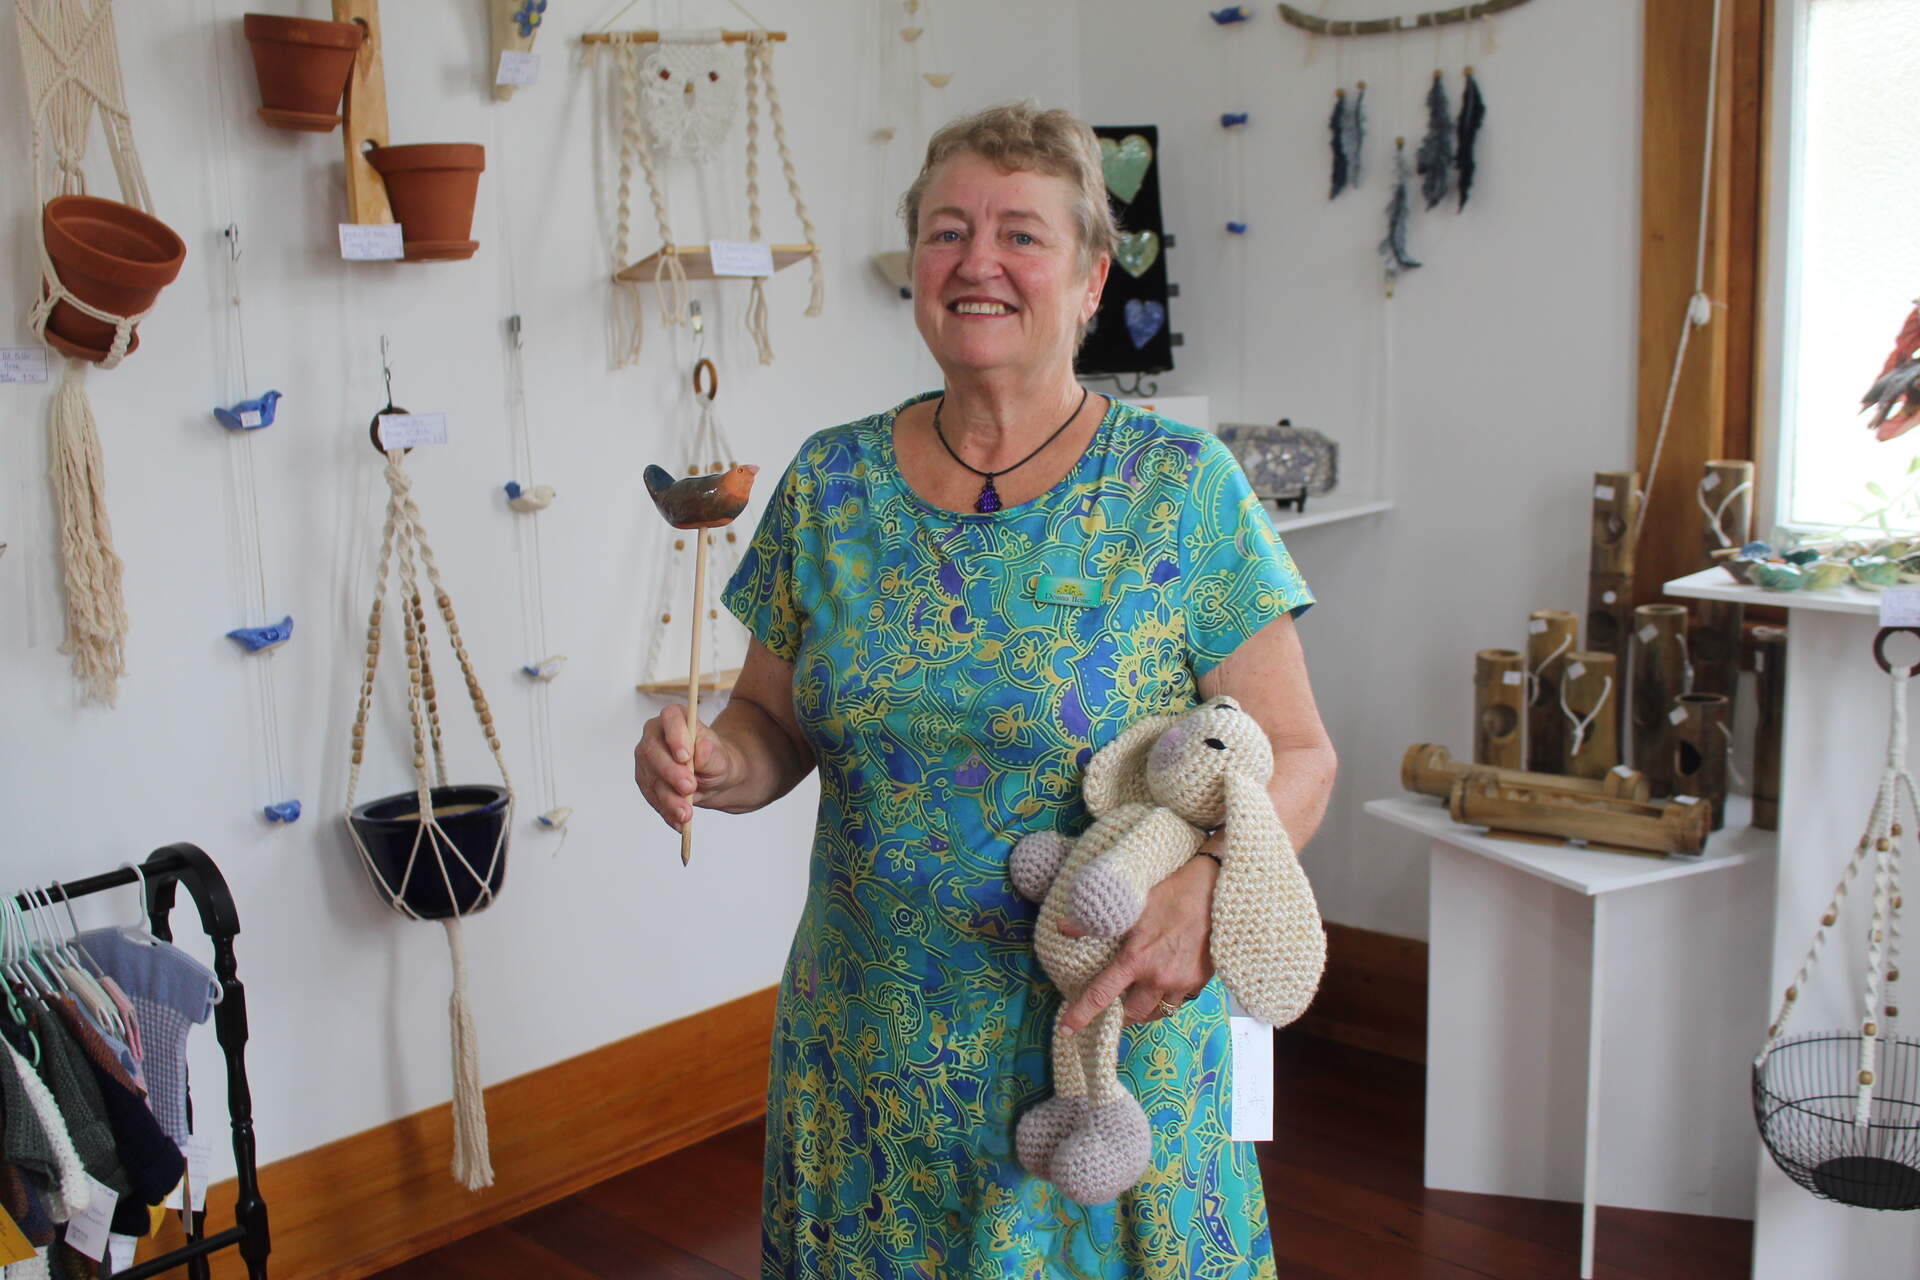 You are currently viewing Macrame, pottery on show